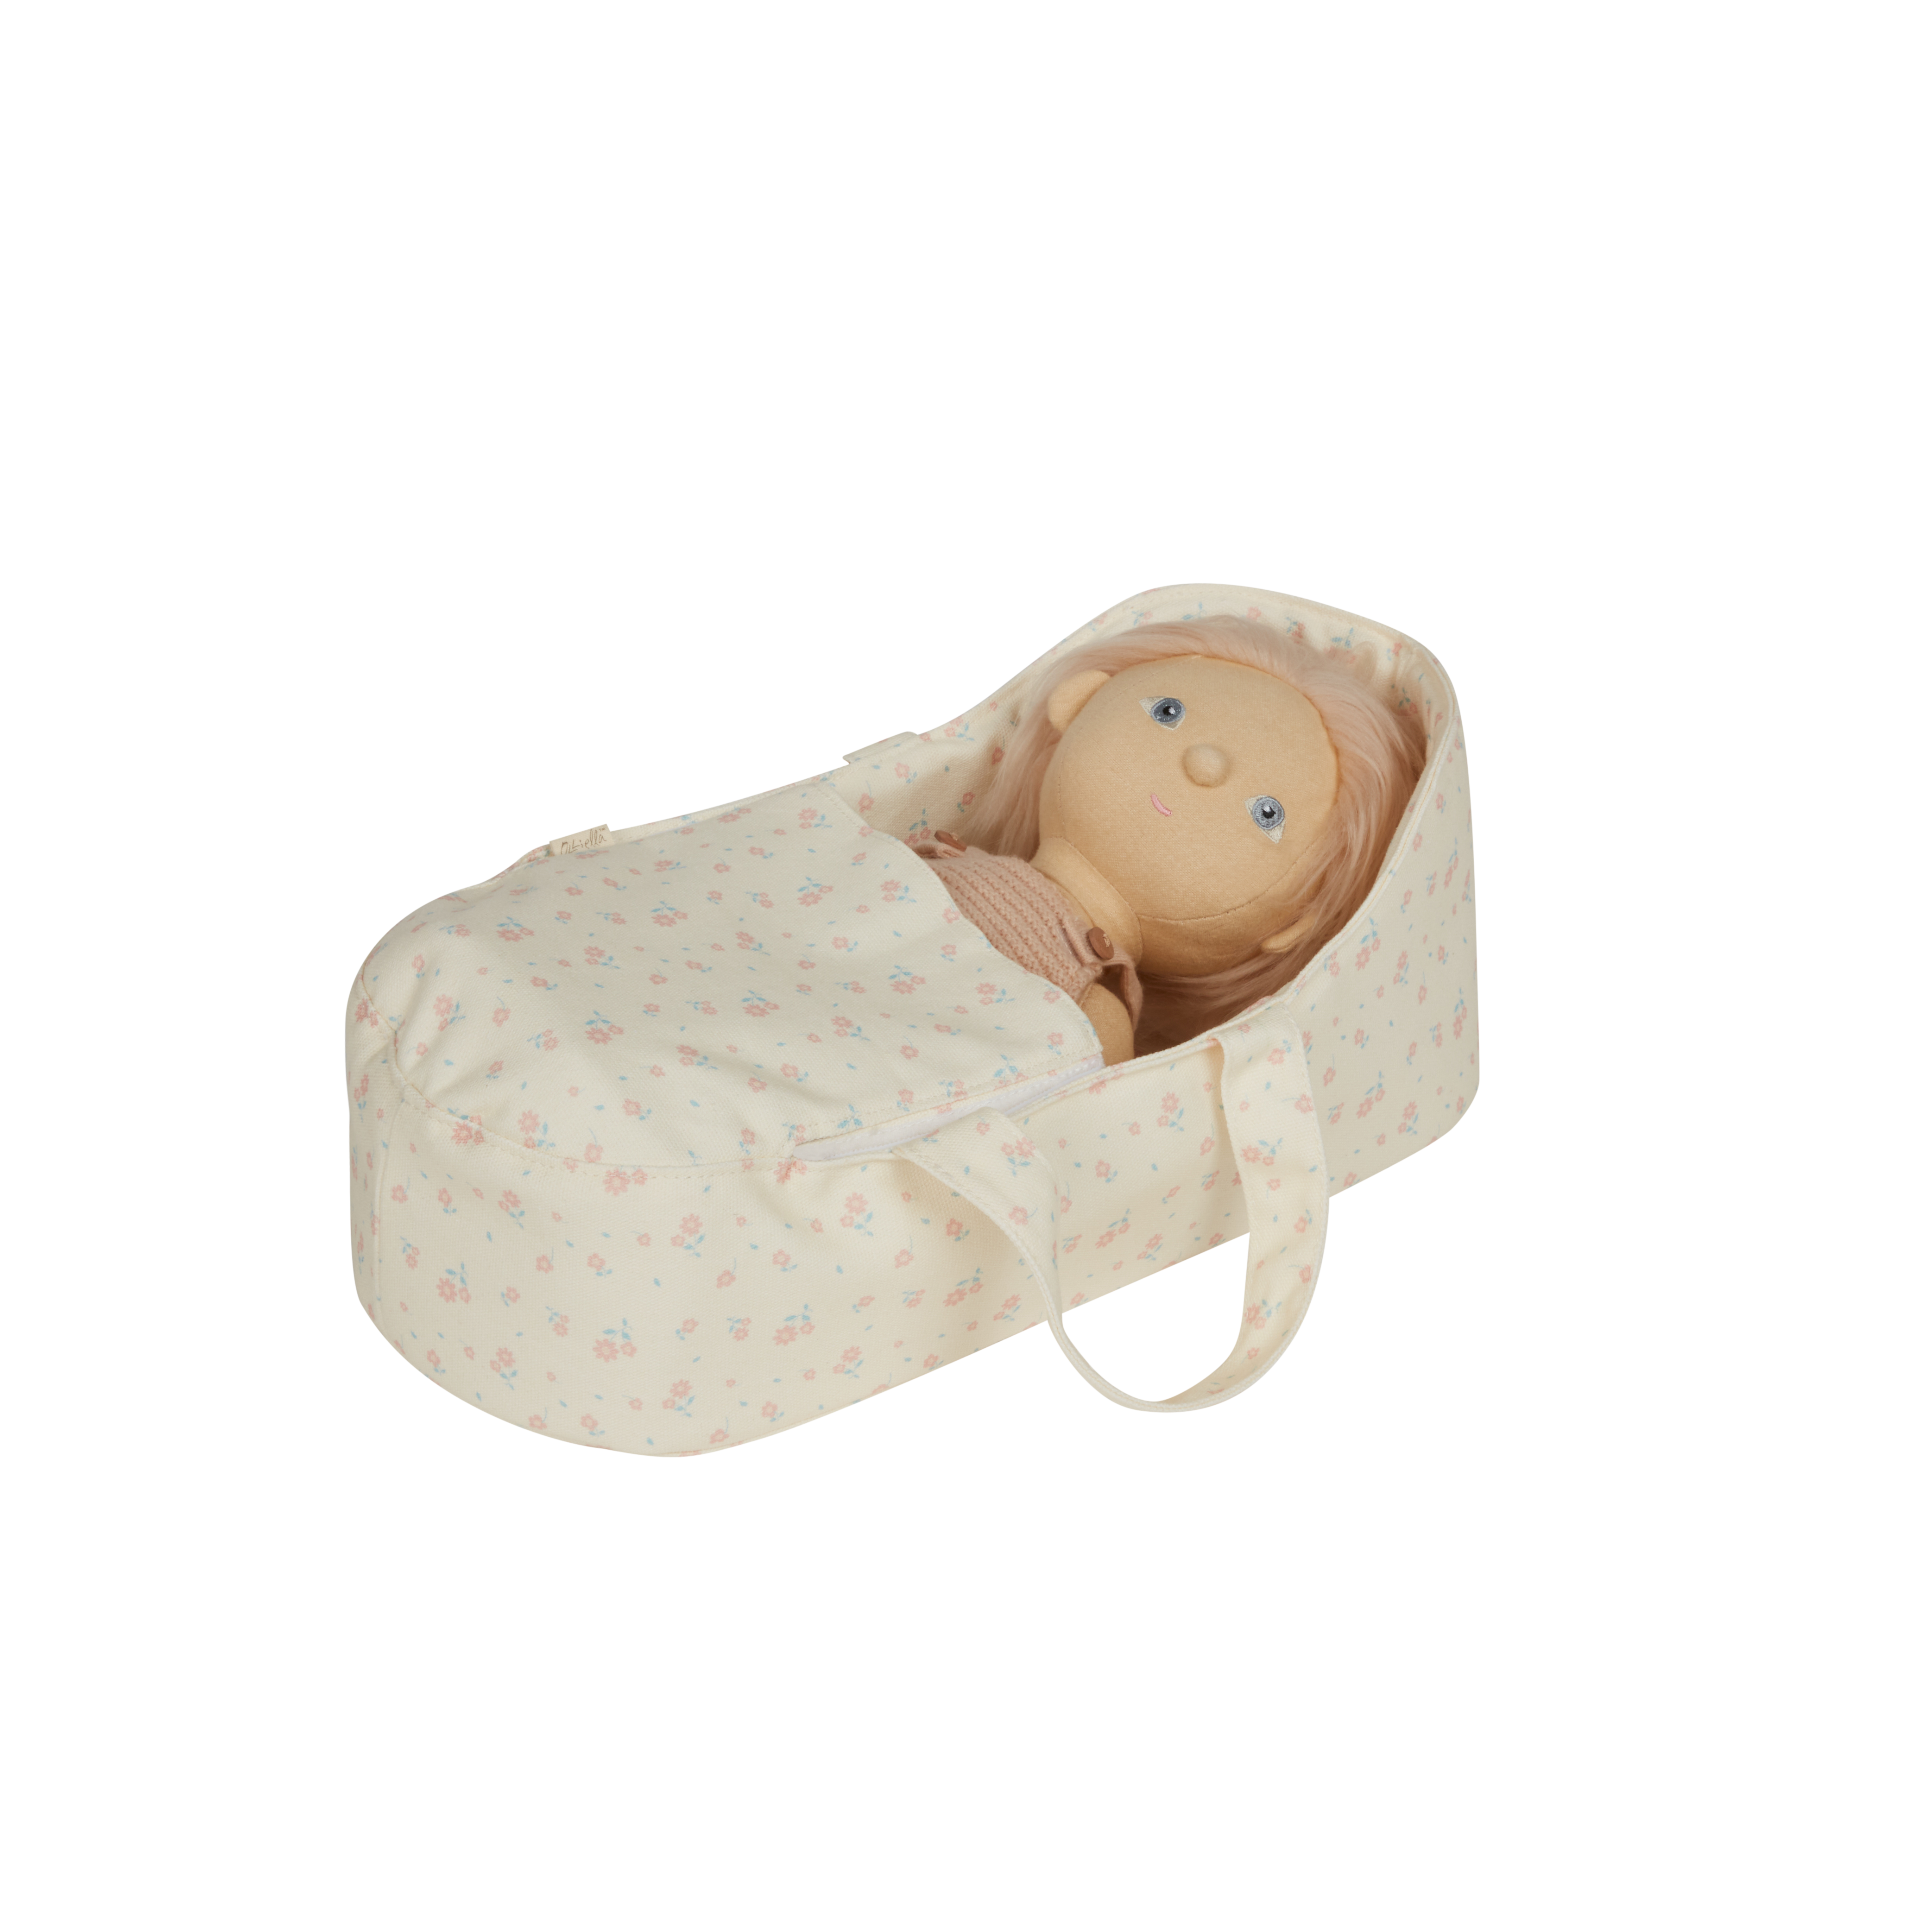 Olli Ella Dinkum Doll Carry Cot – Pansy